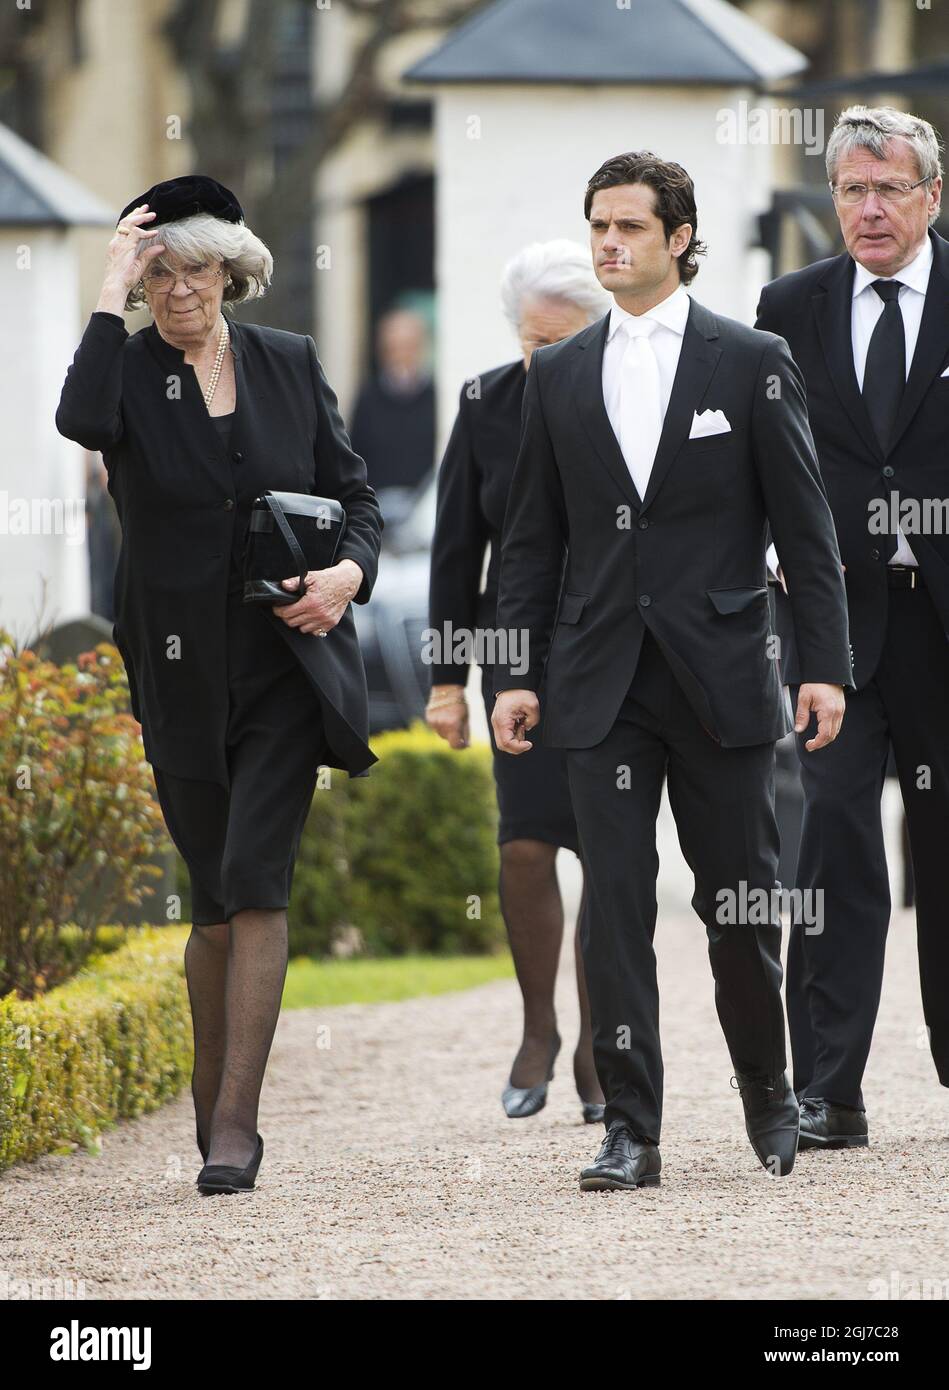 BASTAD 2012-05-14 Princess Margaretha and Prince Cral Philip of Sweden are seen during the funeral of Count Carl Johan Bernadotte in the Maria Church in Bastad, Sweden, May 14, 2012. Foto: Suvad Mrkonjic / XP / SCANPIX / kod 7116 ** OUT SWEDEN OUT T ** Stock Photo